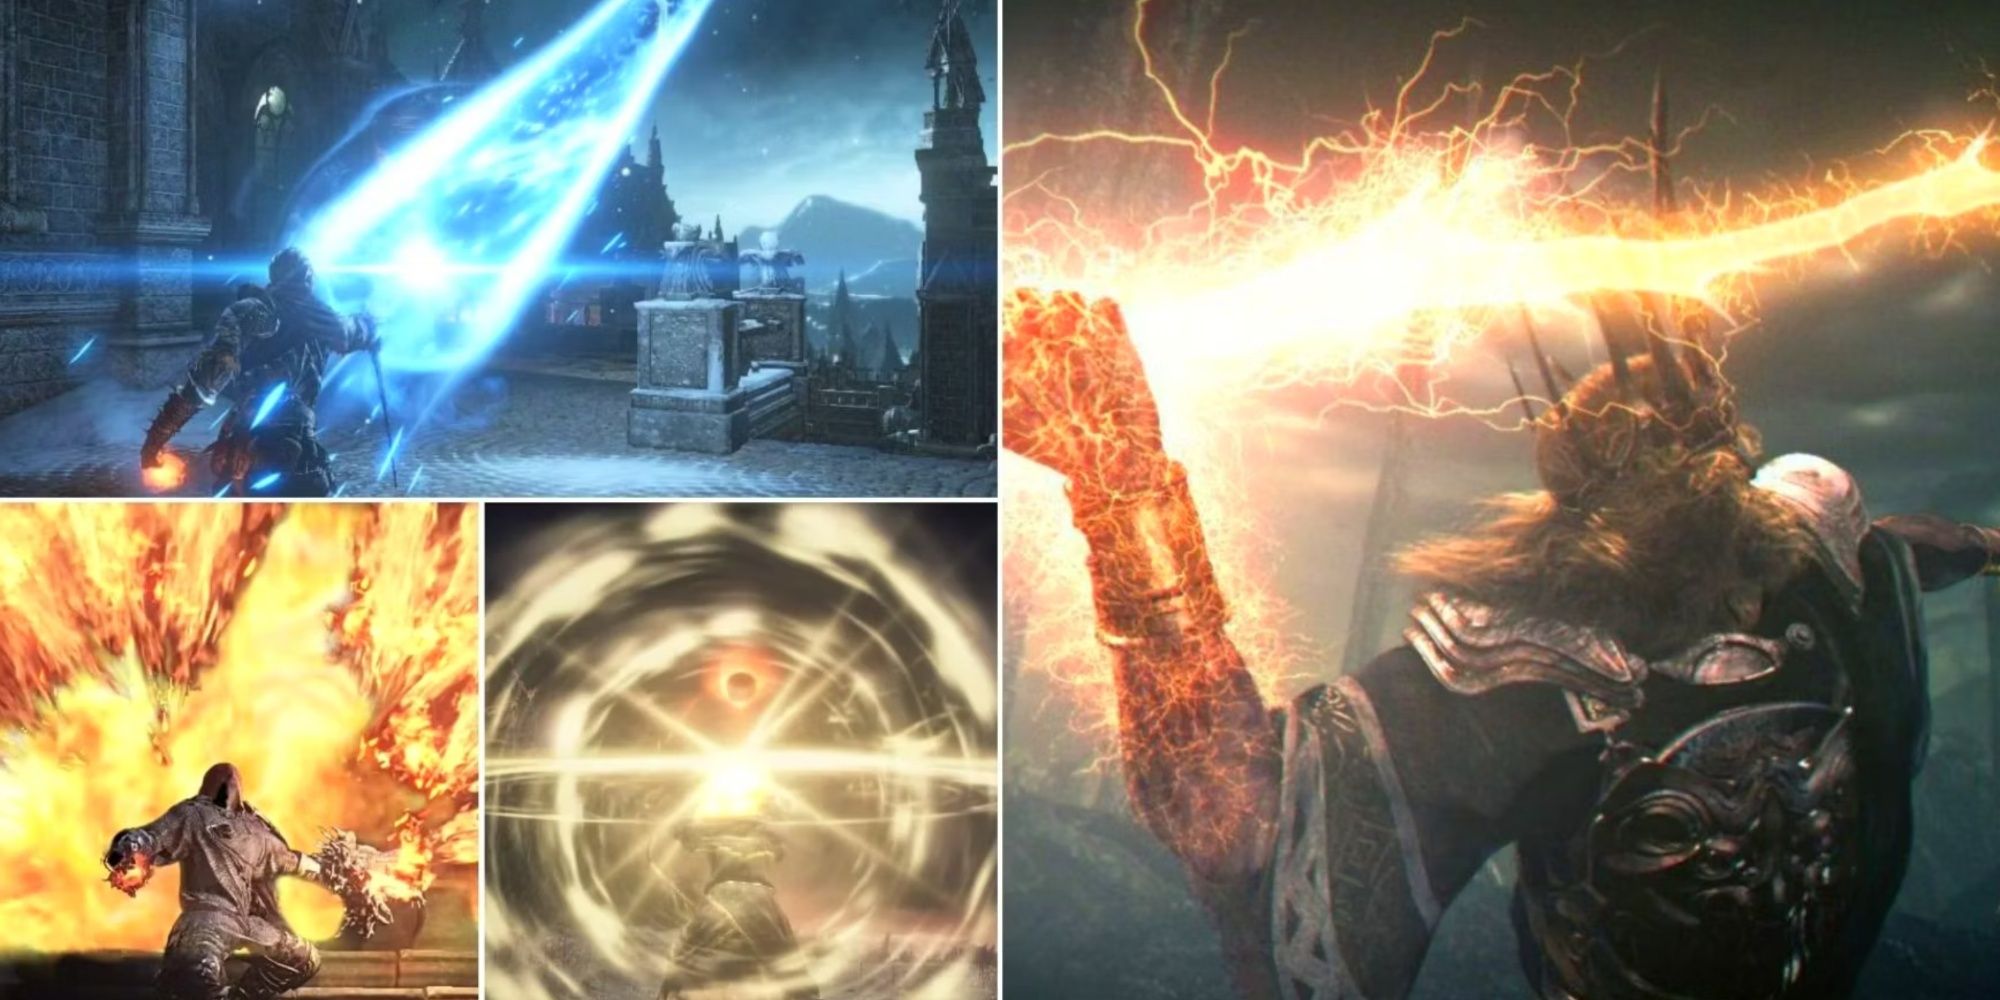 Dark Souls 3 Lothric: Survival Guide from the Expert